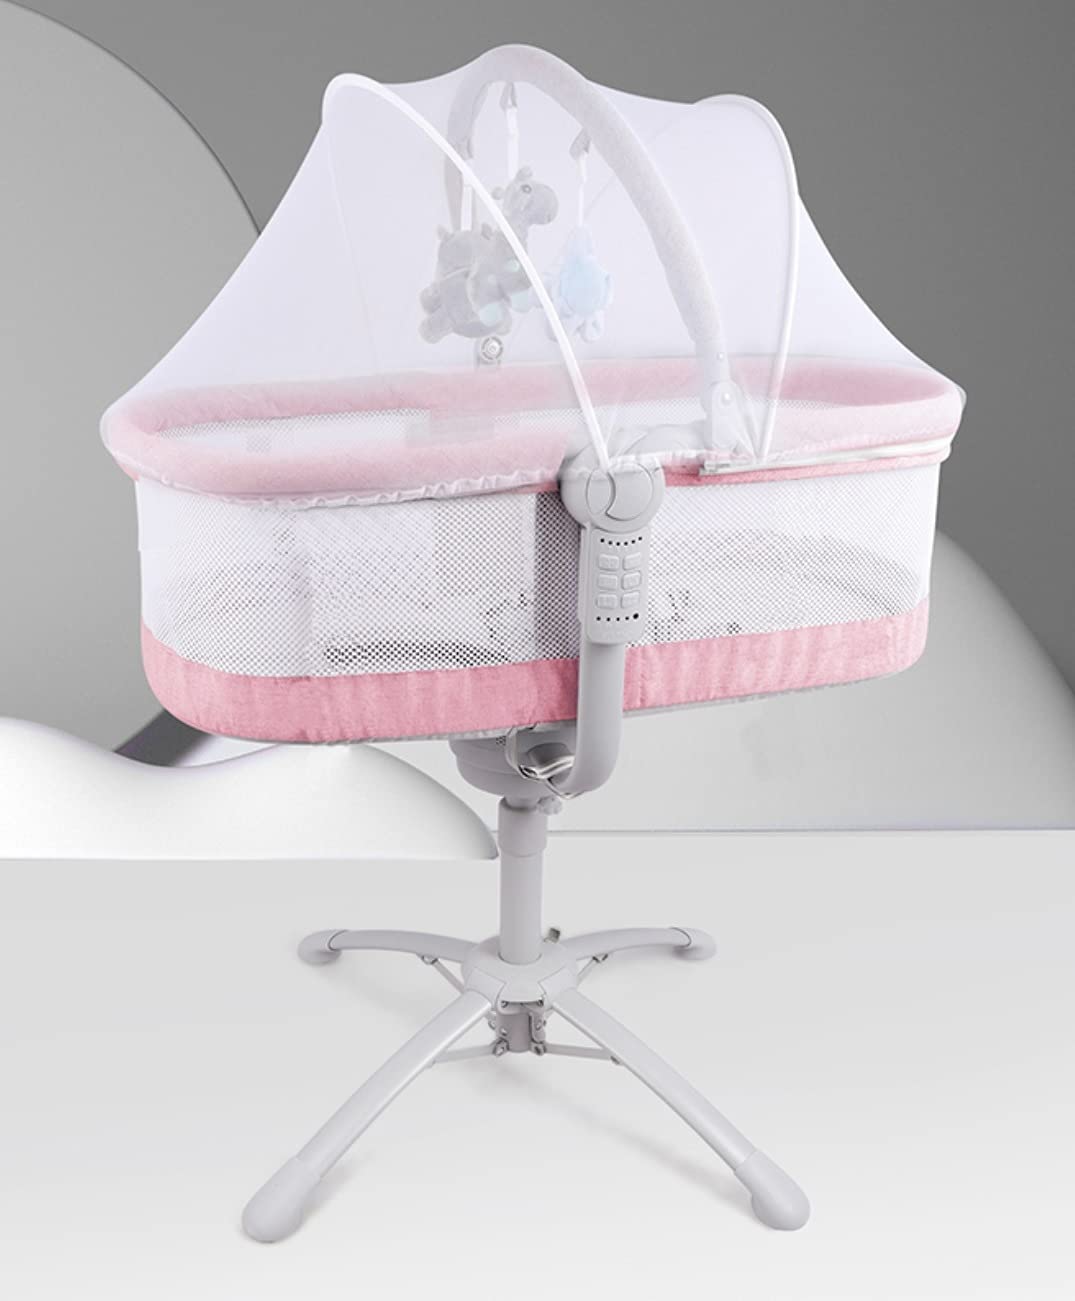 Qatta Baby Cradle by StarAndDaisy 3 in 1 Automatic Baby Cot